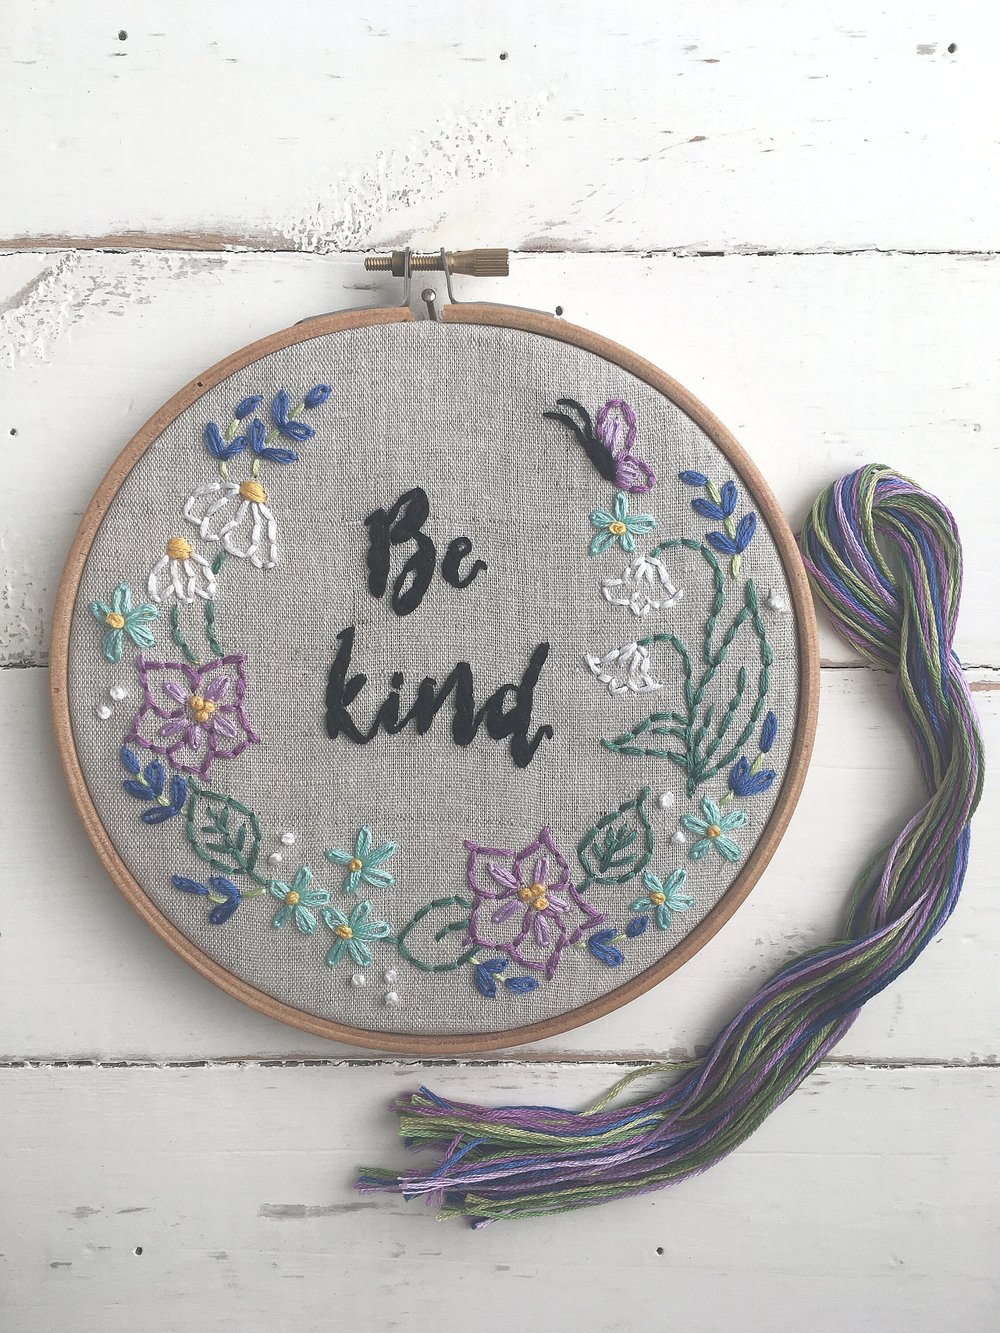 Be Kind Craft Kit, DIY Embroidery Kit, Beginner Embroidery Craft